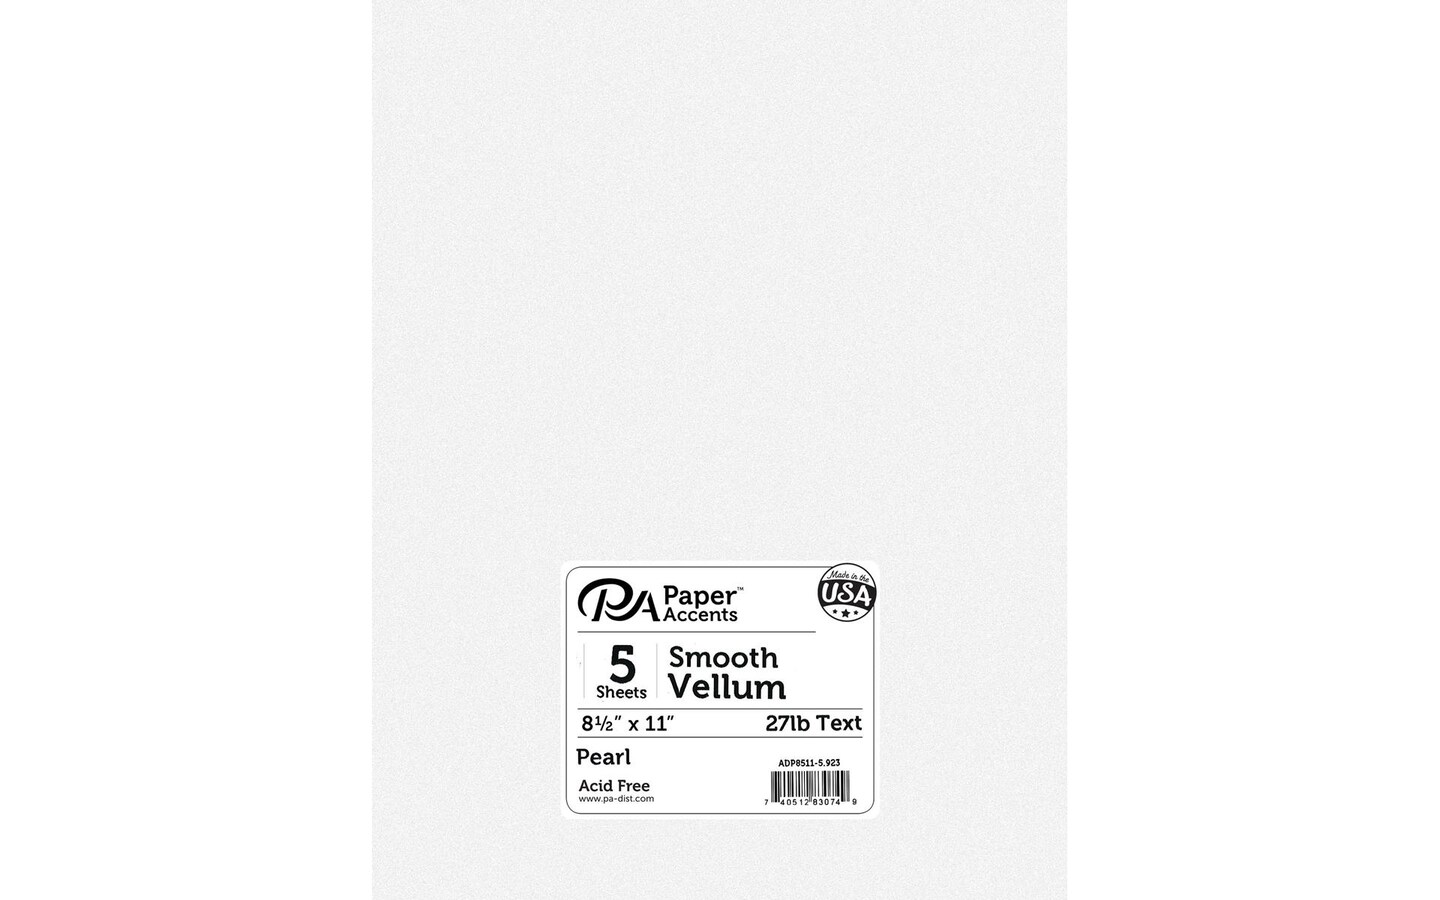 100 Sheets Printable Translucent Vellum Paper, Tracing Paper for  Invitation, Sketching, 93gsm (8.5 x 11 In)